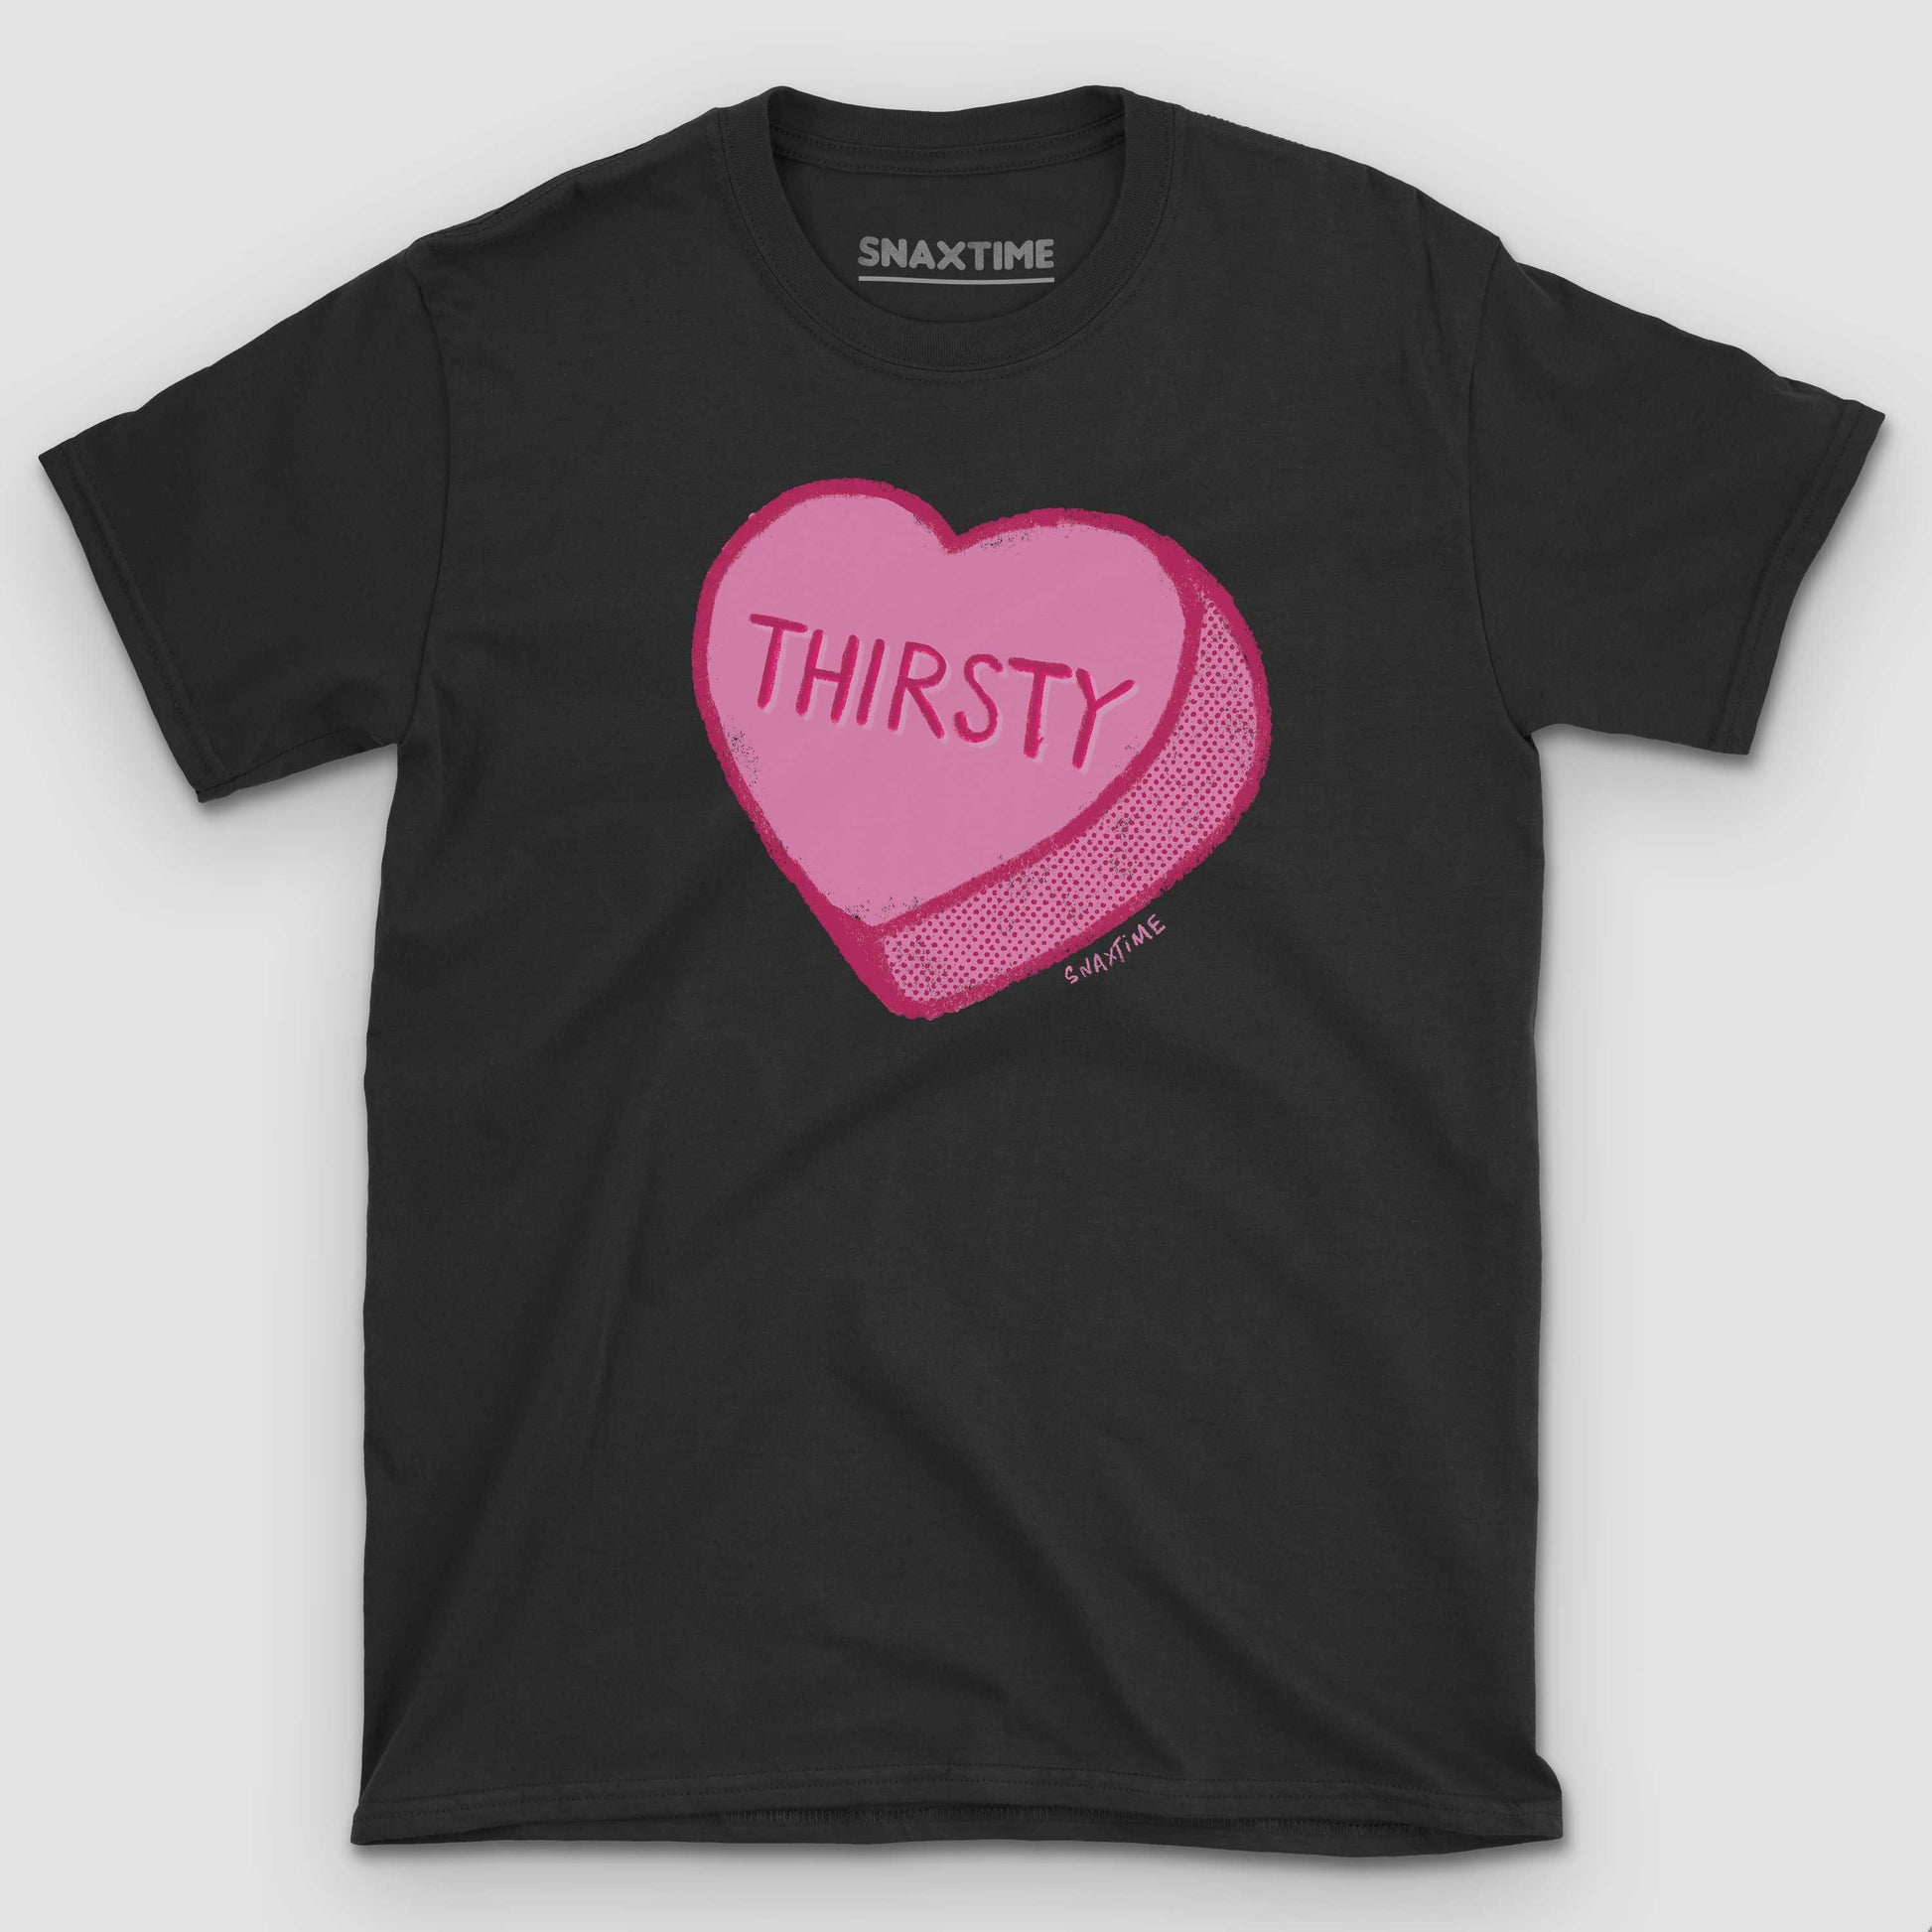 "Thirsty" Candy Heart Graphic T-Shirt - Snaxtime Retro Style Food Apparel